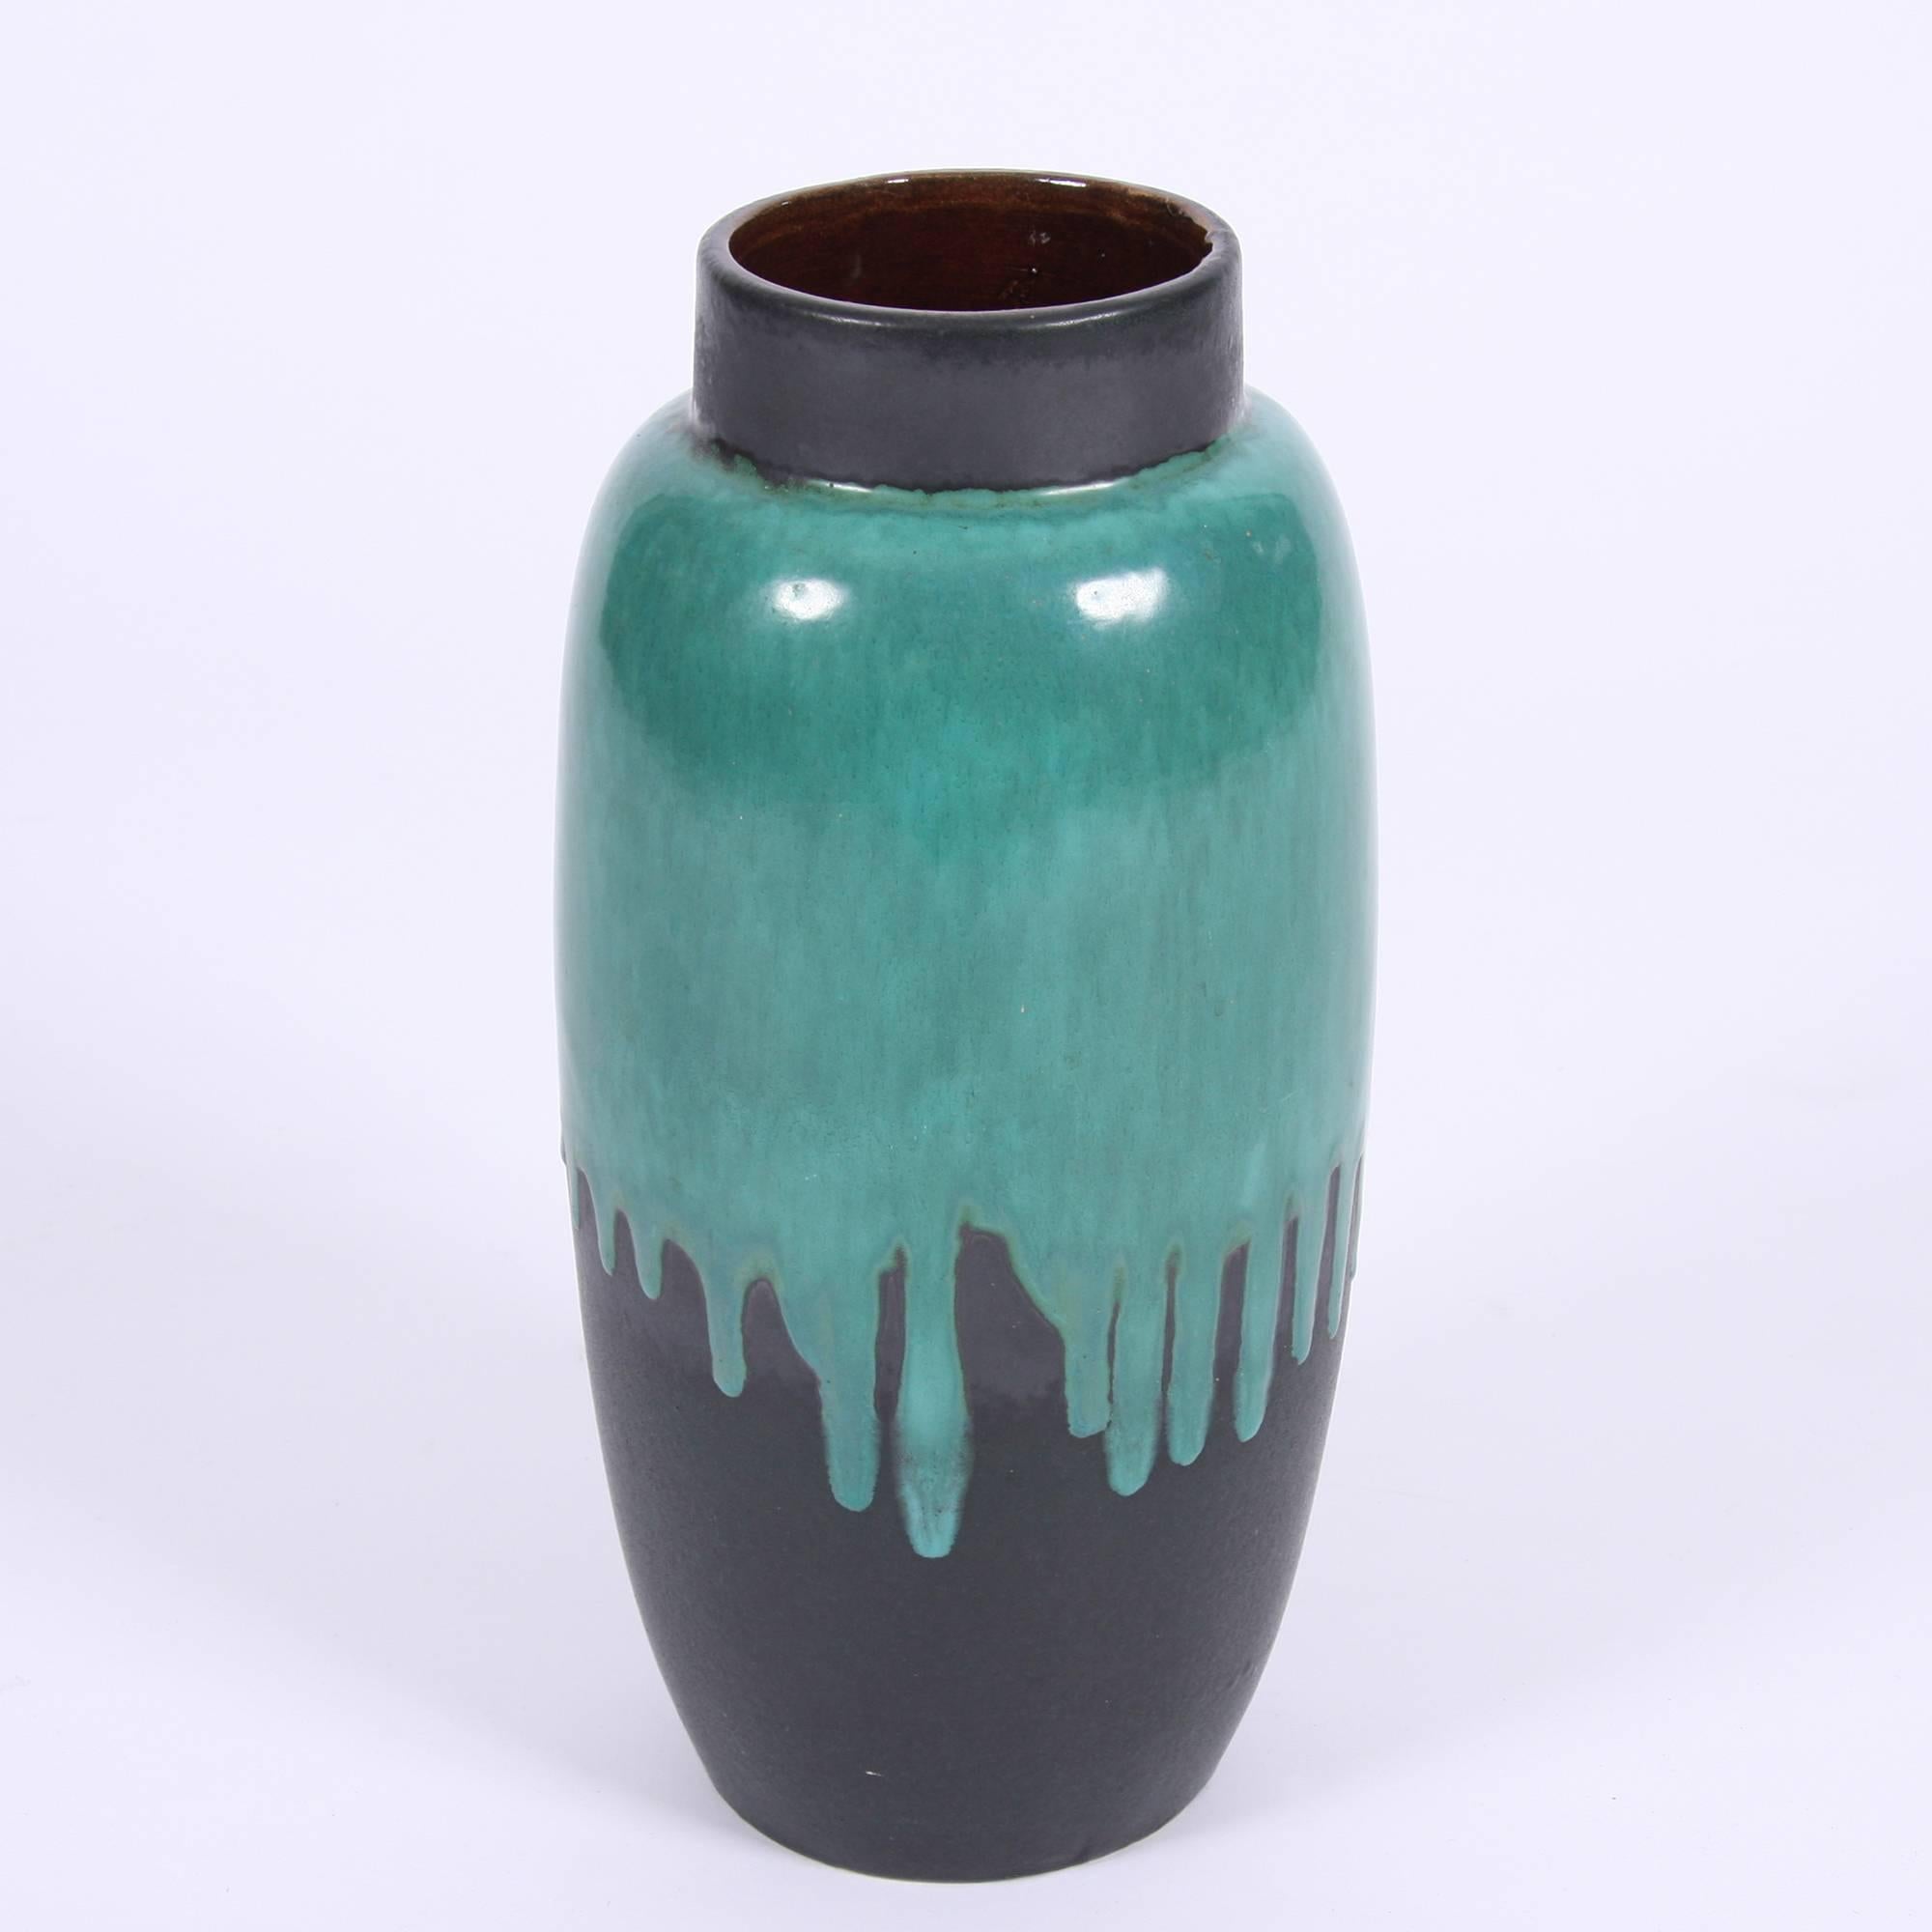 German, circa 1960

A fabulous 1960s West German ceramic vase with a vivid 'drip' effect glazed finish. Marked on base.